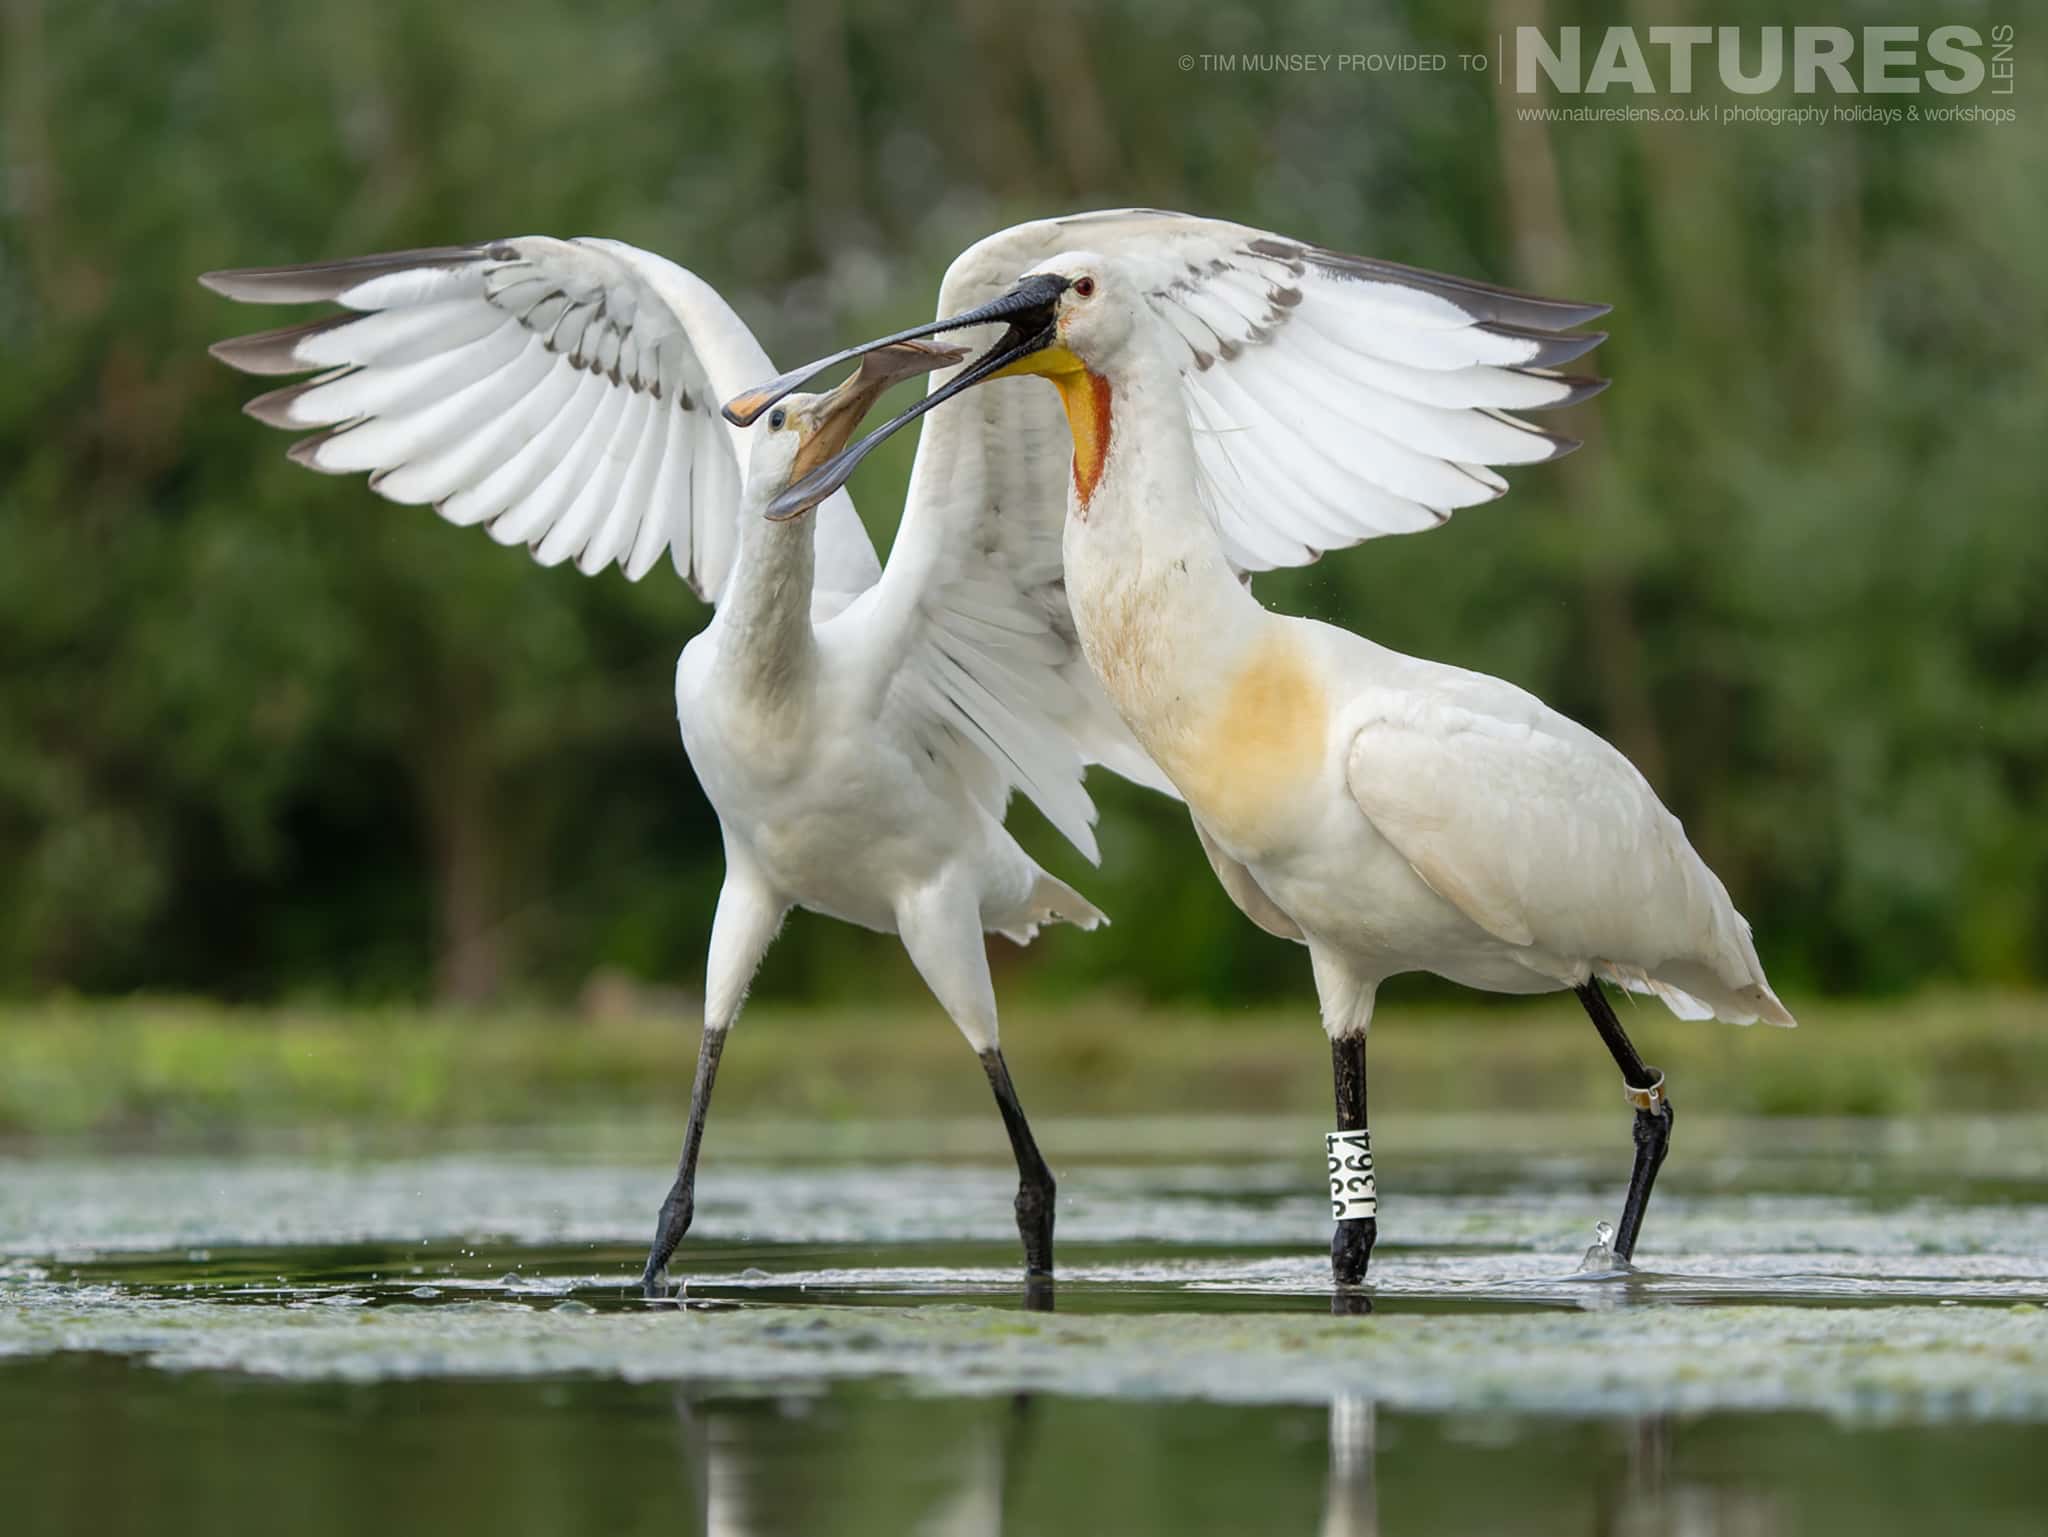 A squabbling pair of Eurasian Spoonbills in one of the ponds - photographed at Bence Máté's hides in Hungary during a NaturesLens wildlife photography holiday